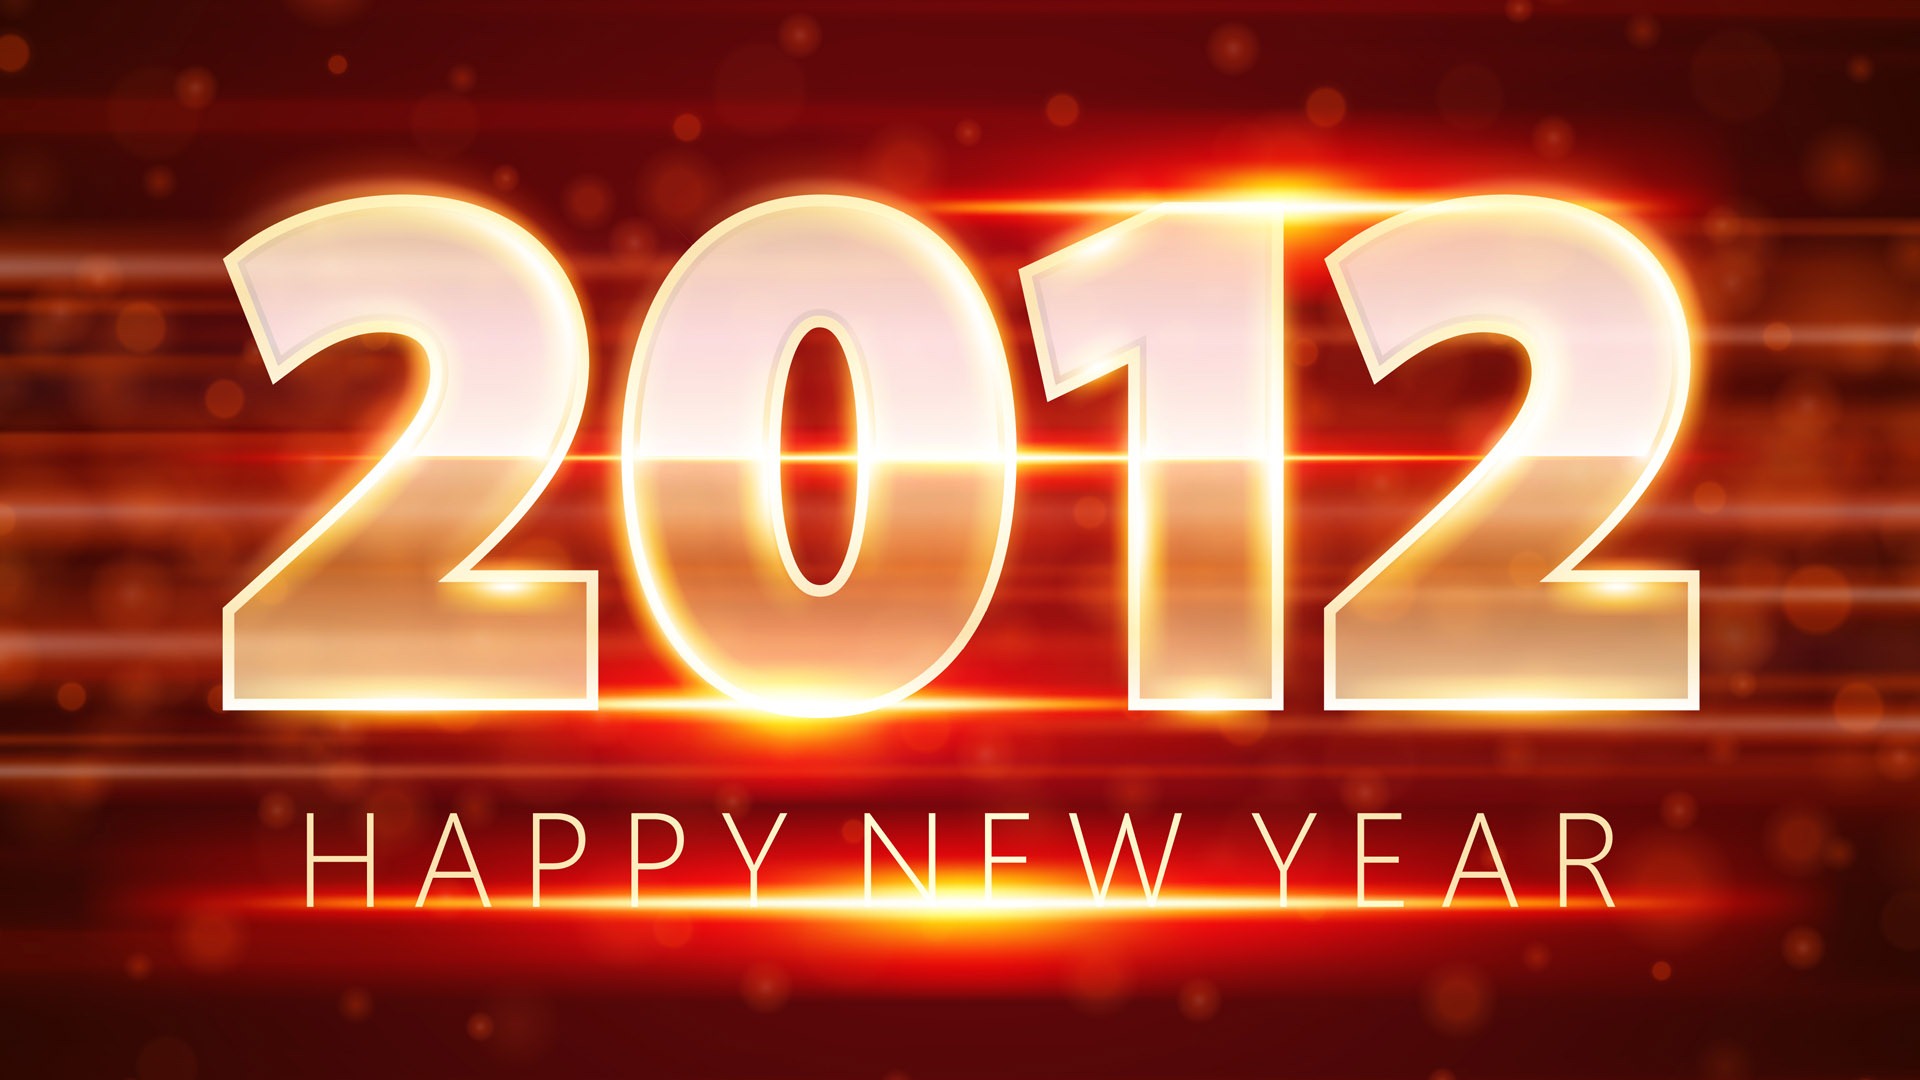 2012 New Year wallpapers (1) #2 - 1920x1080